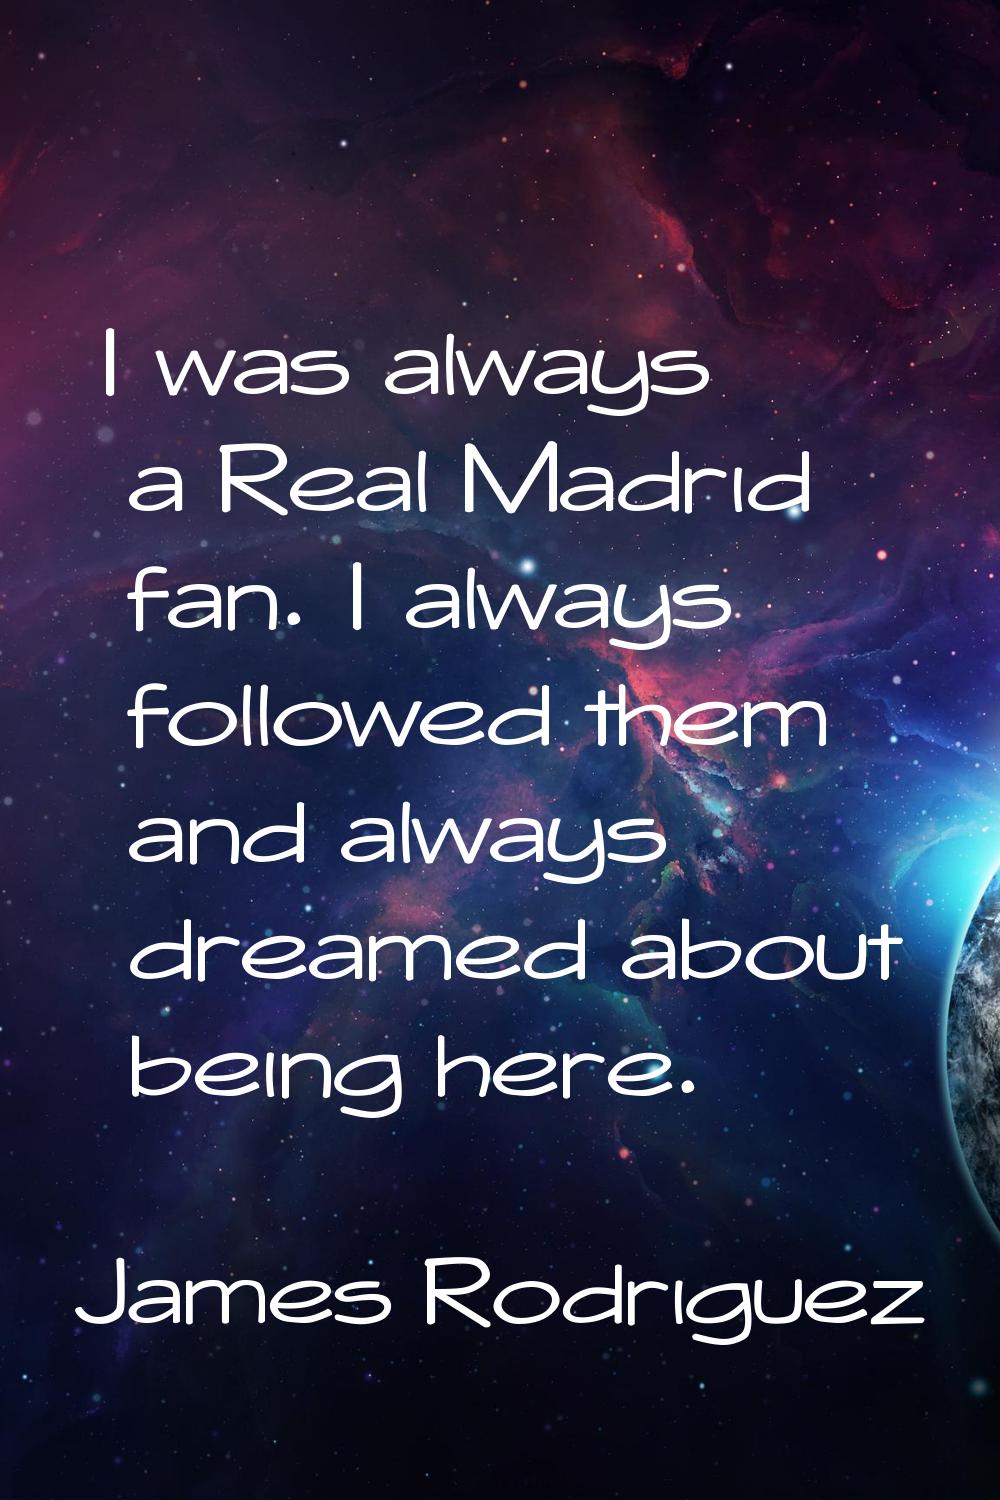 I was always a Real Madrid fan. I always followed them and always dreamed about being here.